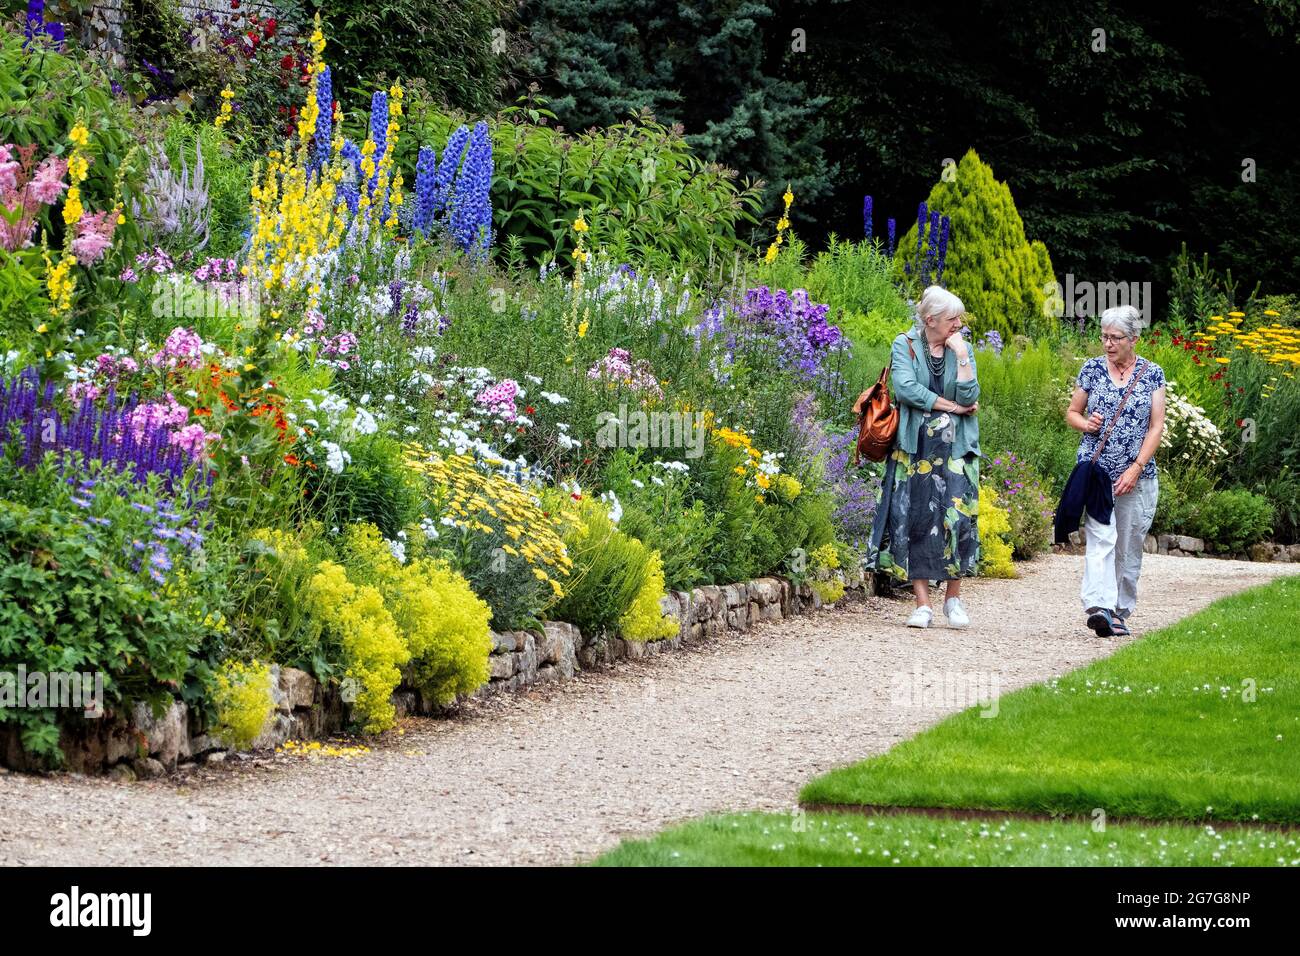 The Herbaceous Boarder at Waterperry Garden Wheatley Oxfordshire UK Stockfoto